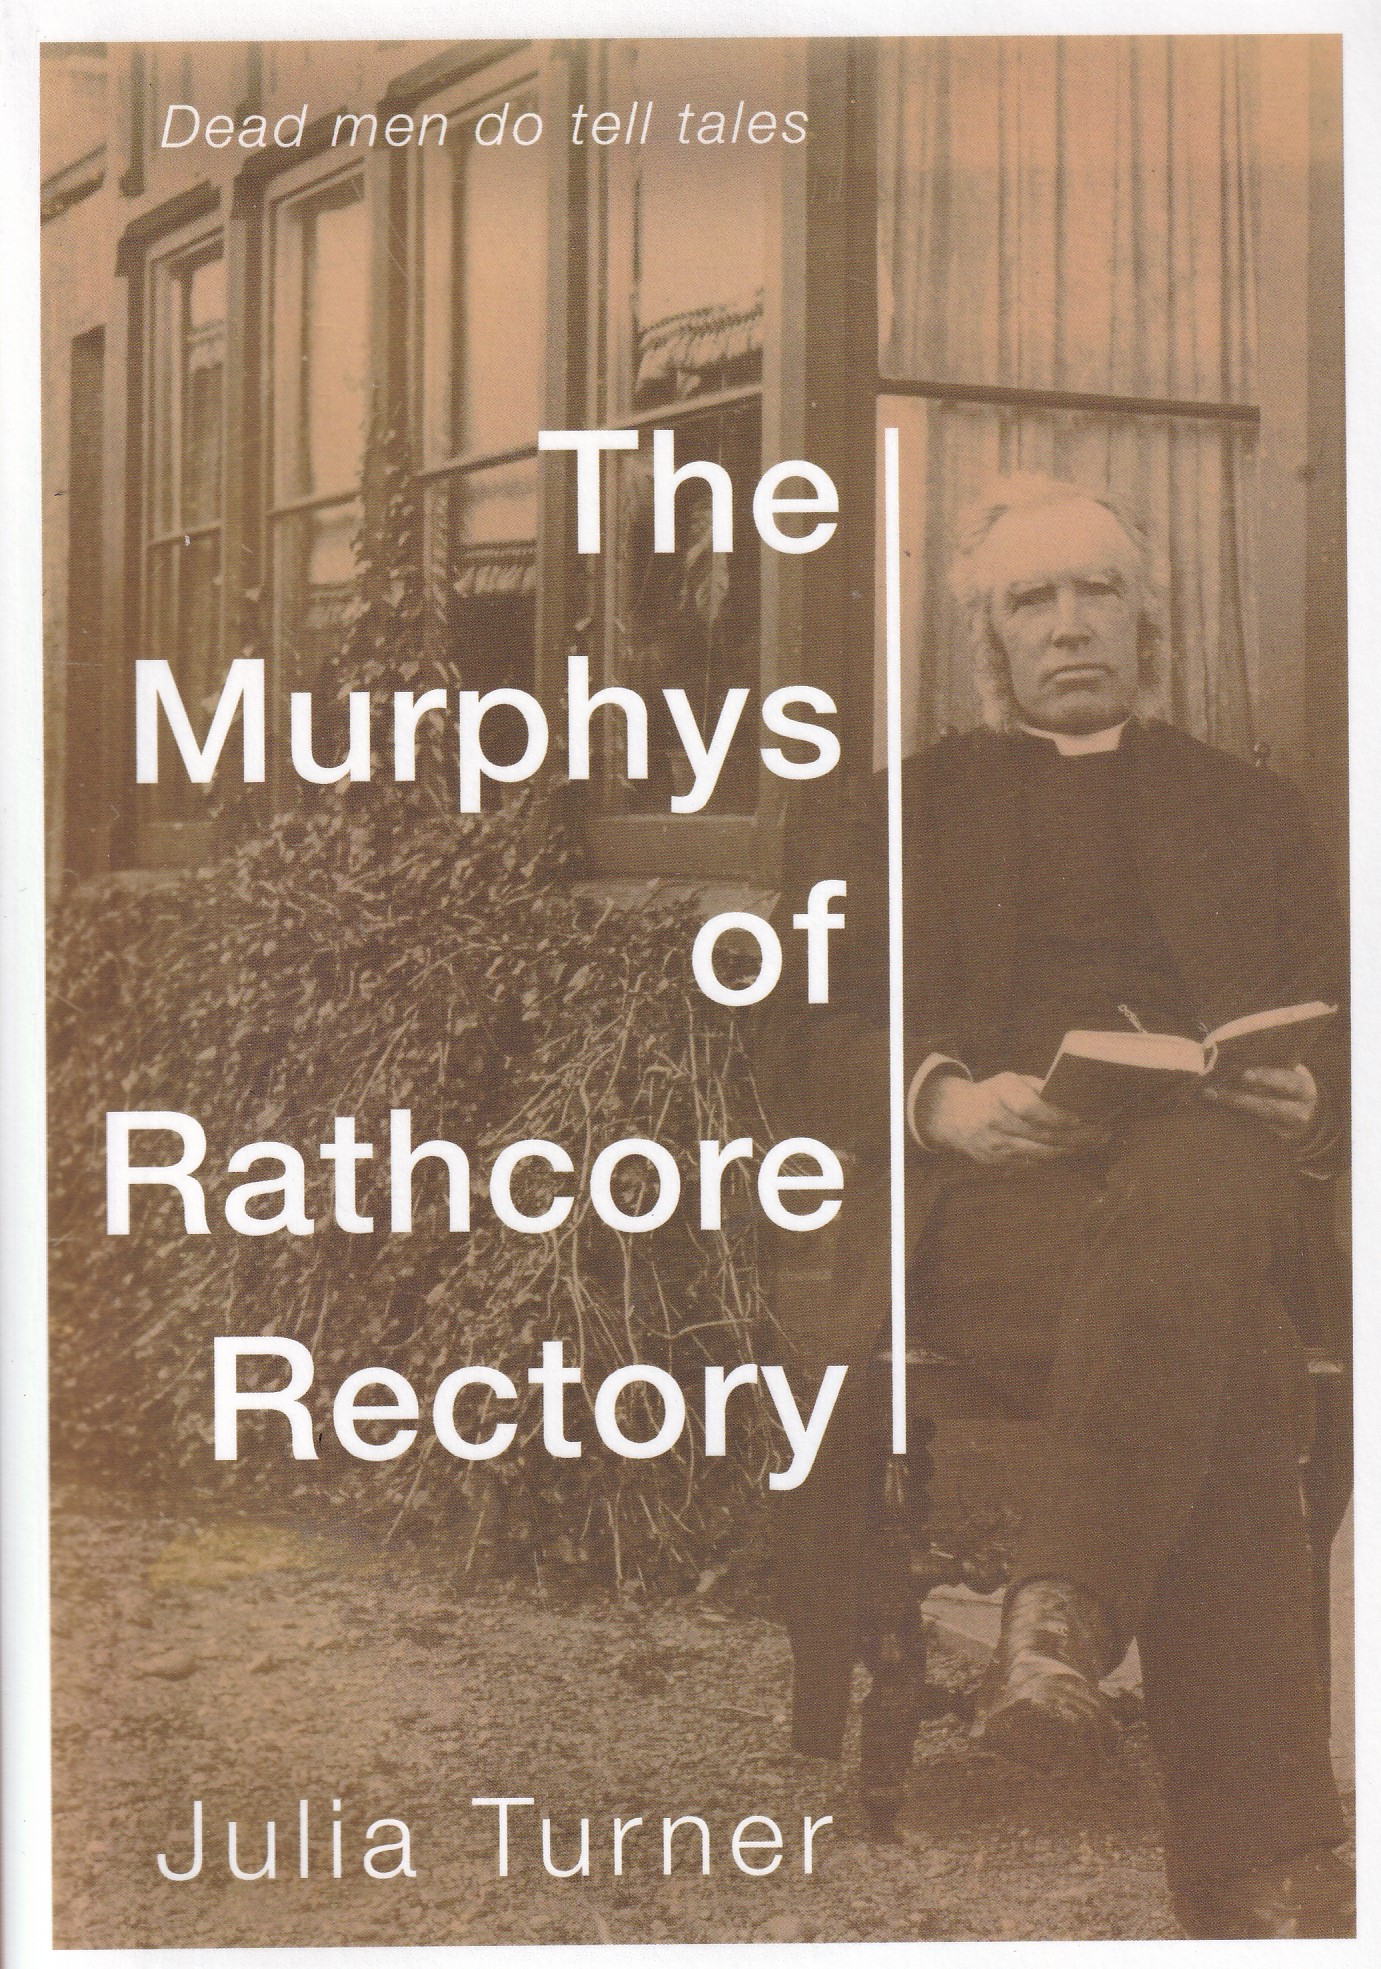 The Murphys of Rathcore Rectory | Julia Turner | Charlie Byrne's